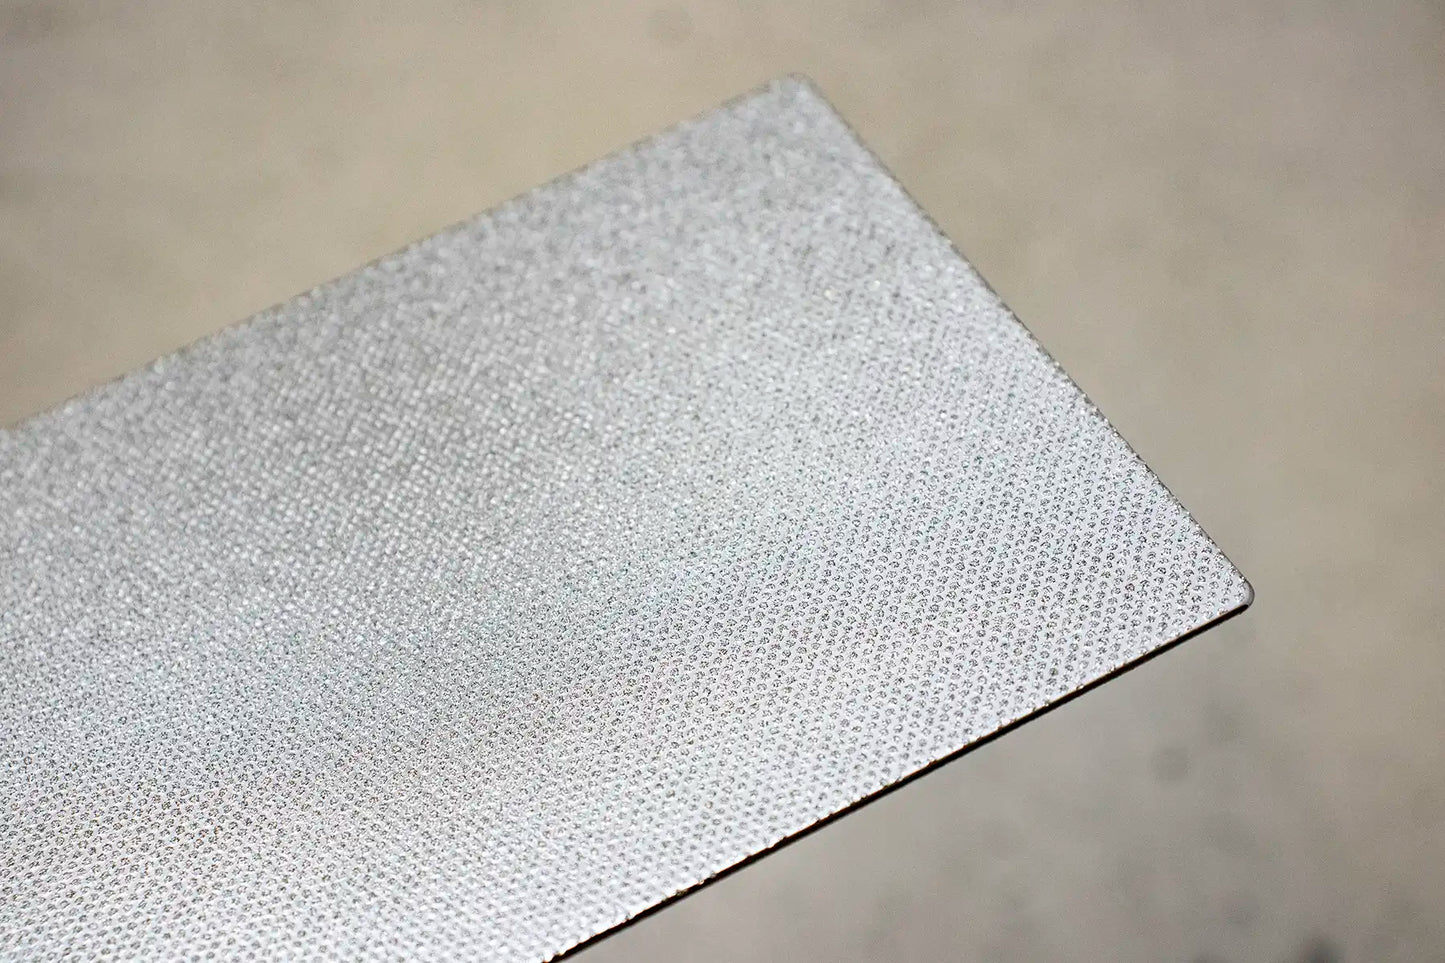 Atoma Lapping Plate Replacement Sheet (140 grit)